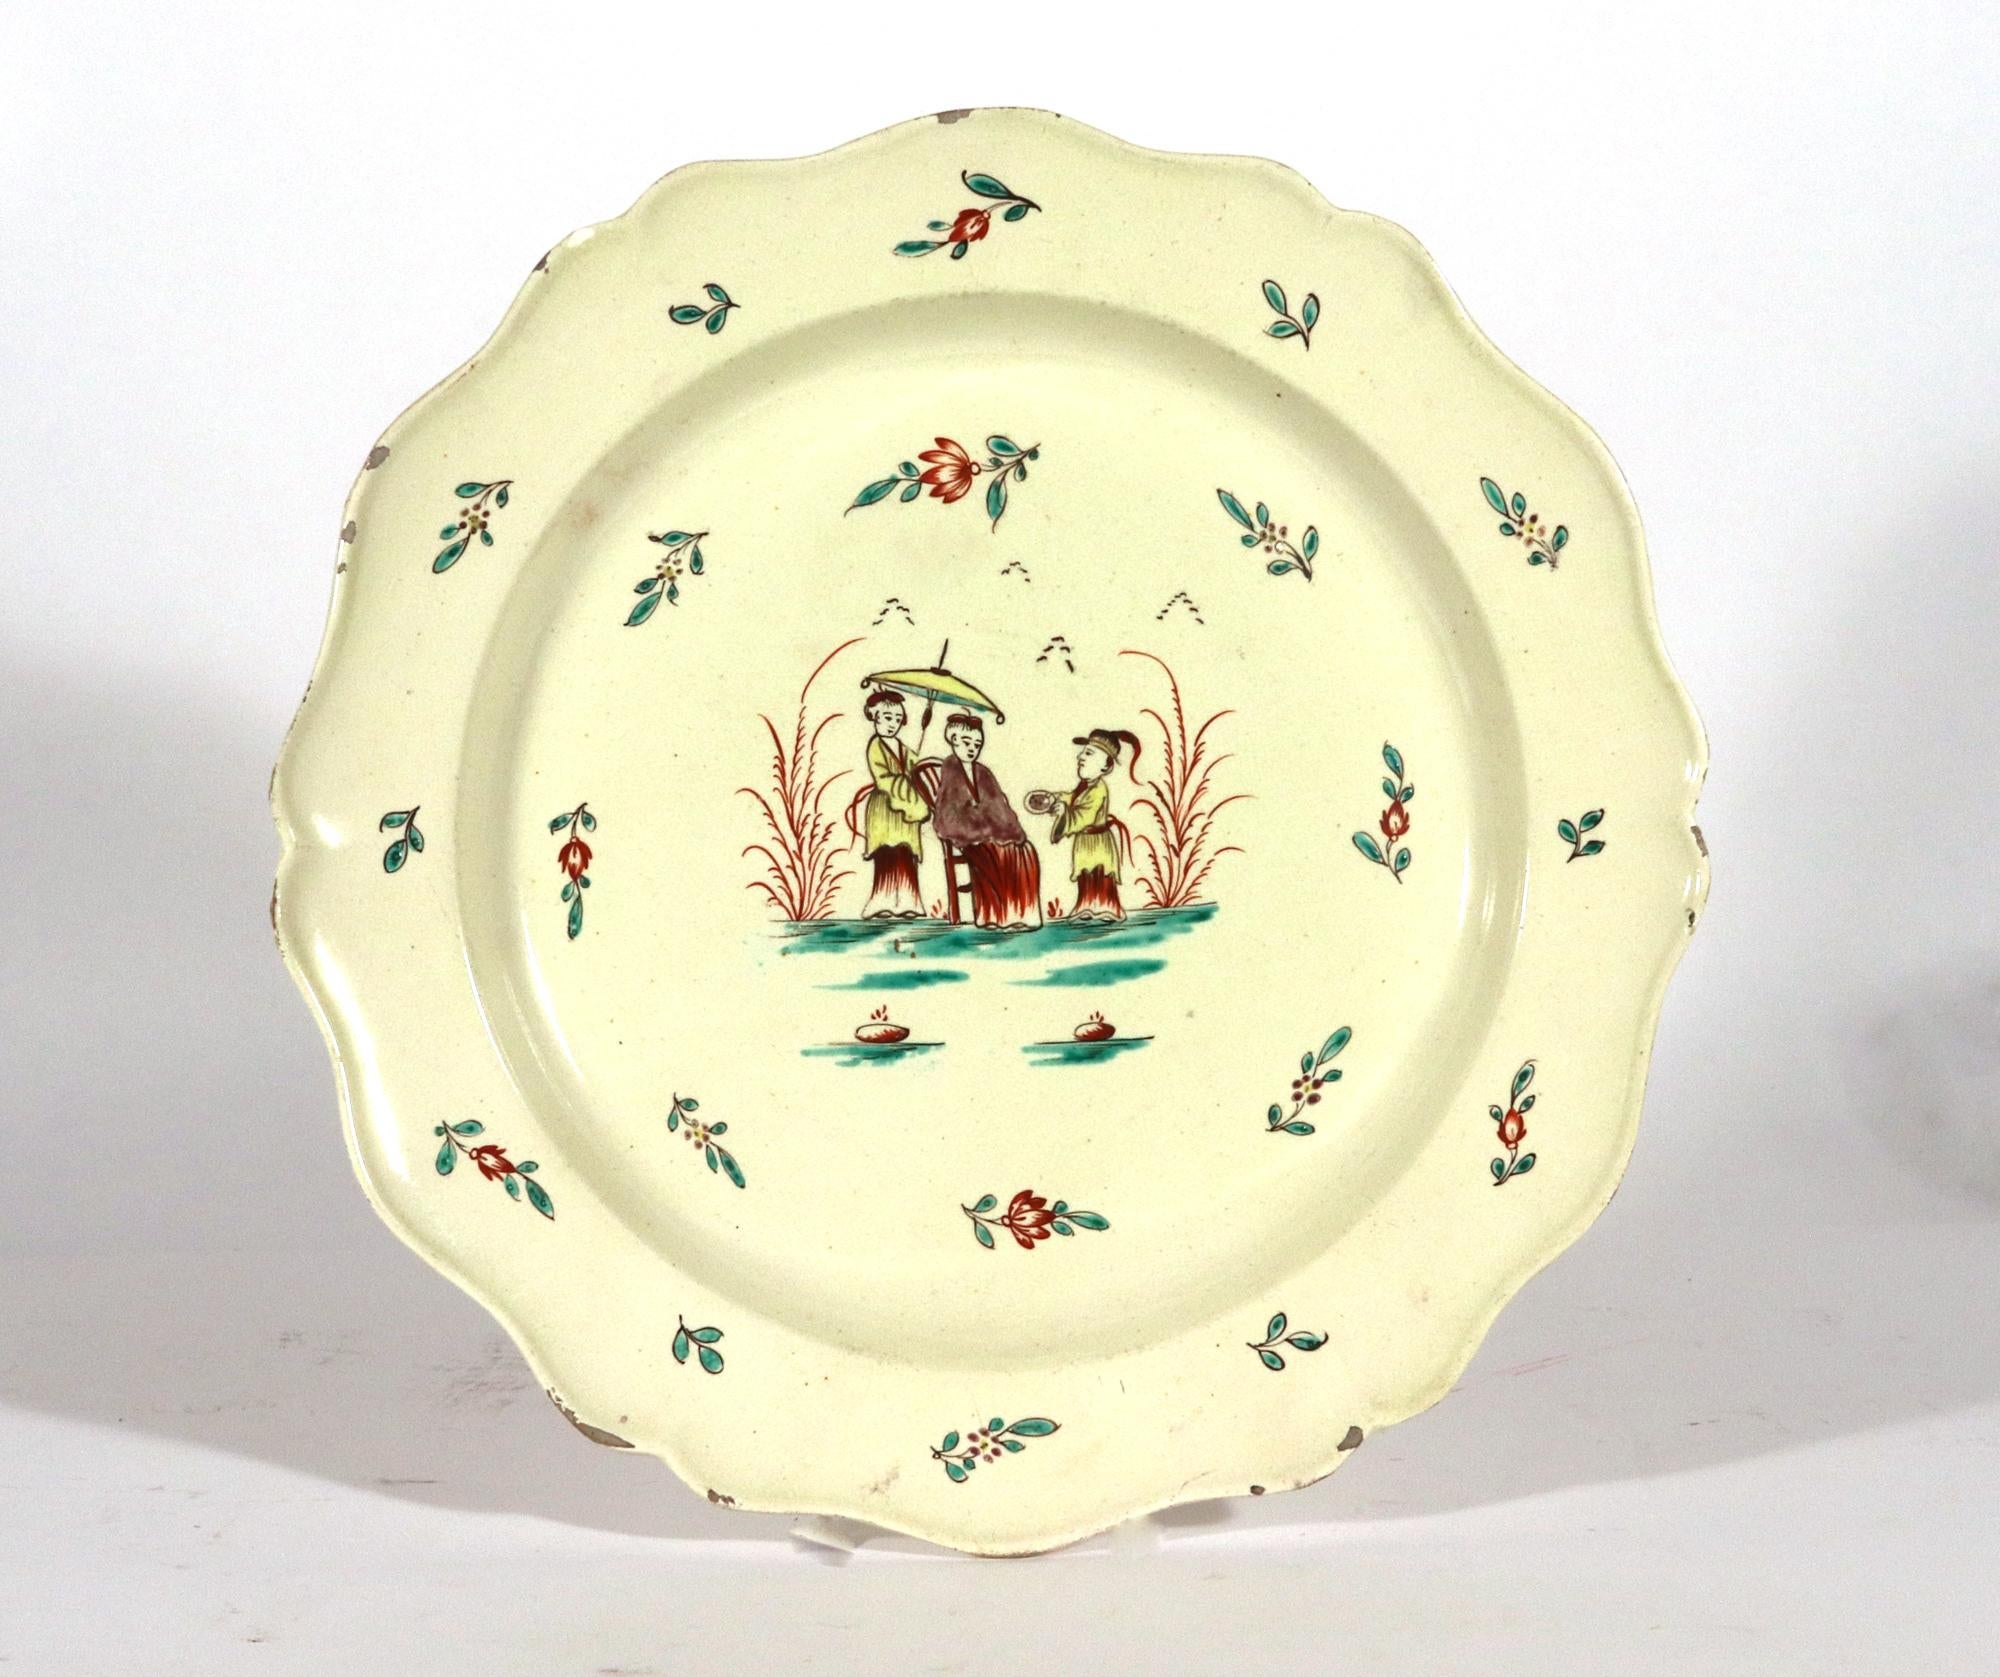 Creamware Large Dishes with Chinoiserie Decoration,
Circa 1775-85.

The large creamware dishes have a shaped rim with a slightly molded raised rim.  The center has a Chinoiserie design of a Chinese lady seated in a wood chair with two attendants,